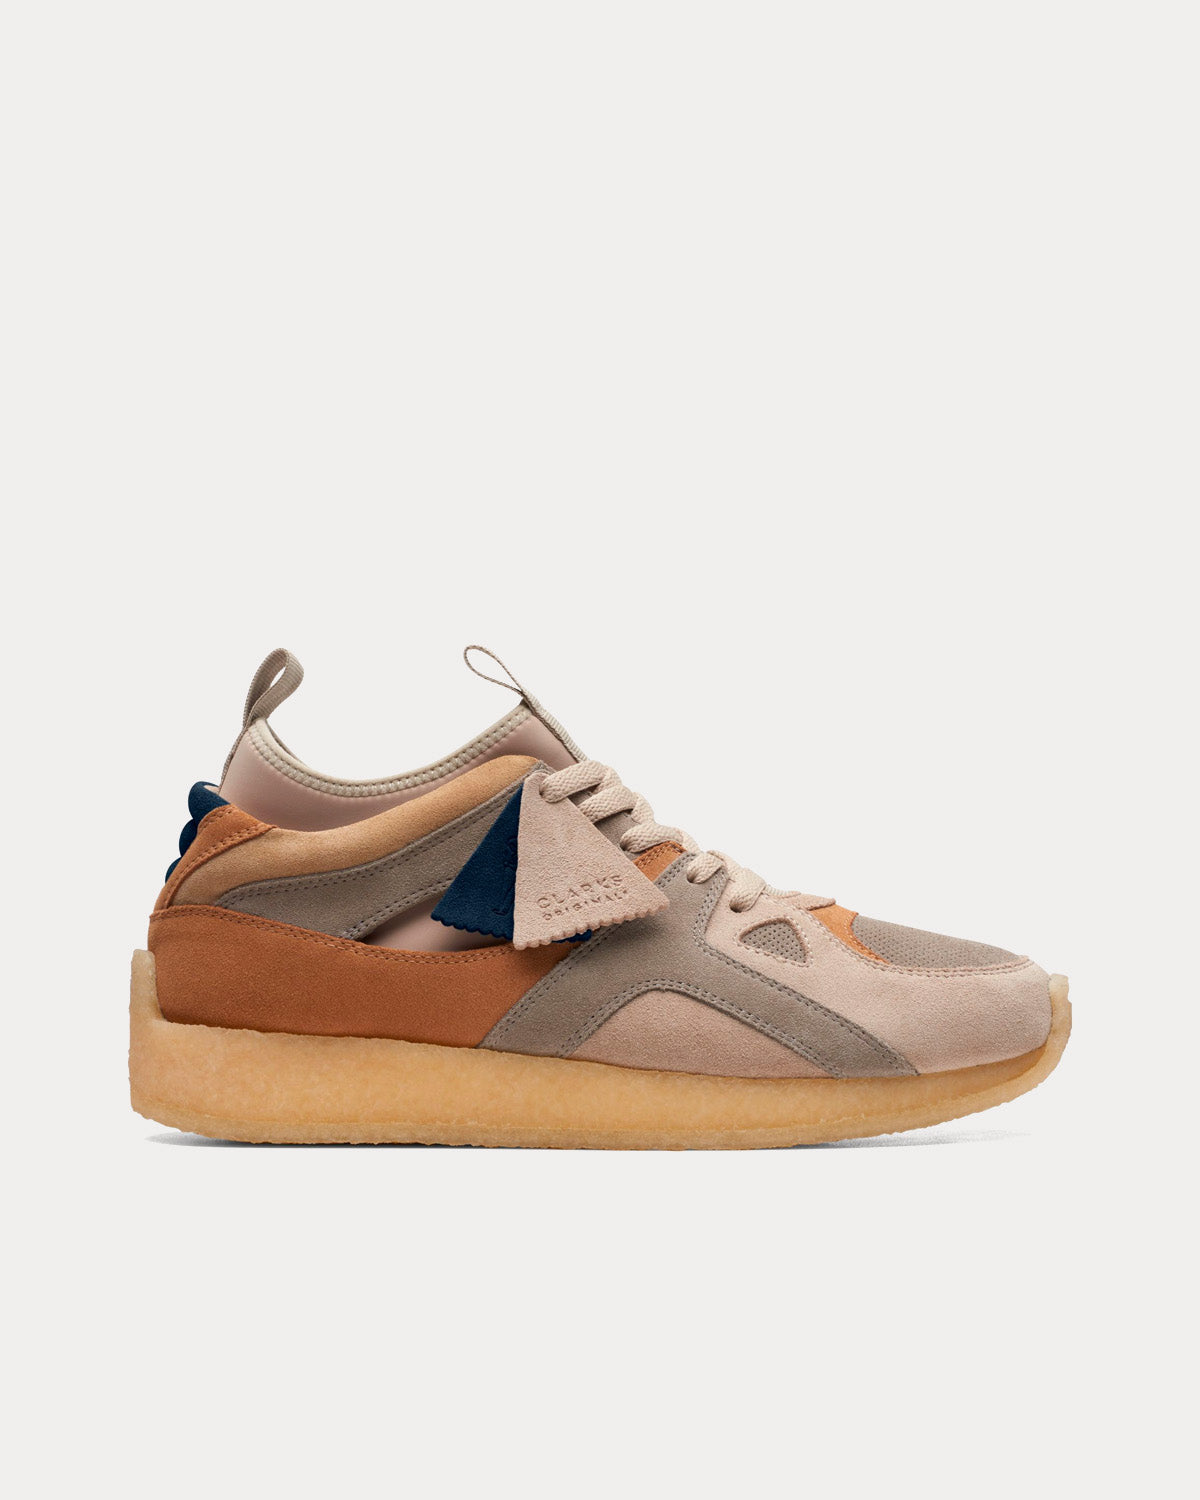 Clarks x Kith - 8th St Breacon Light Grey Combination Low Top Sneakers